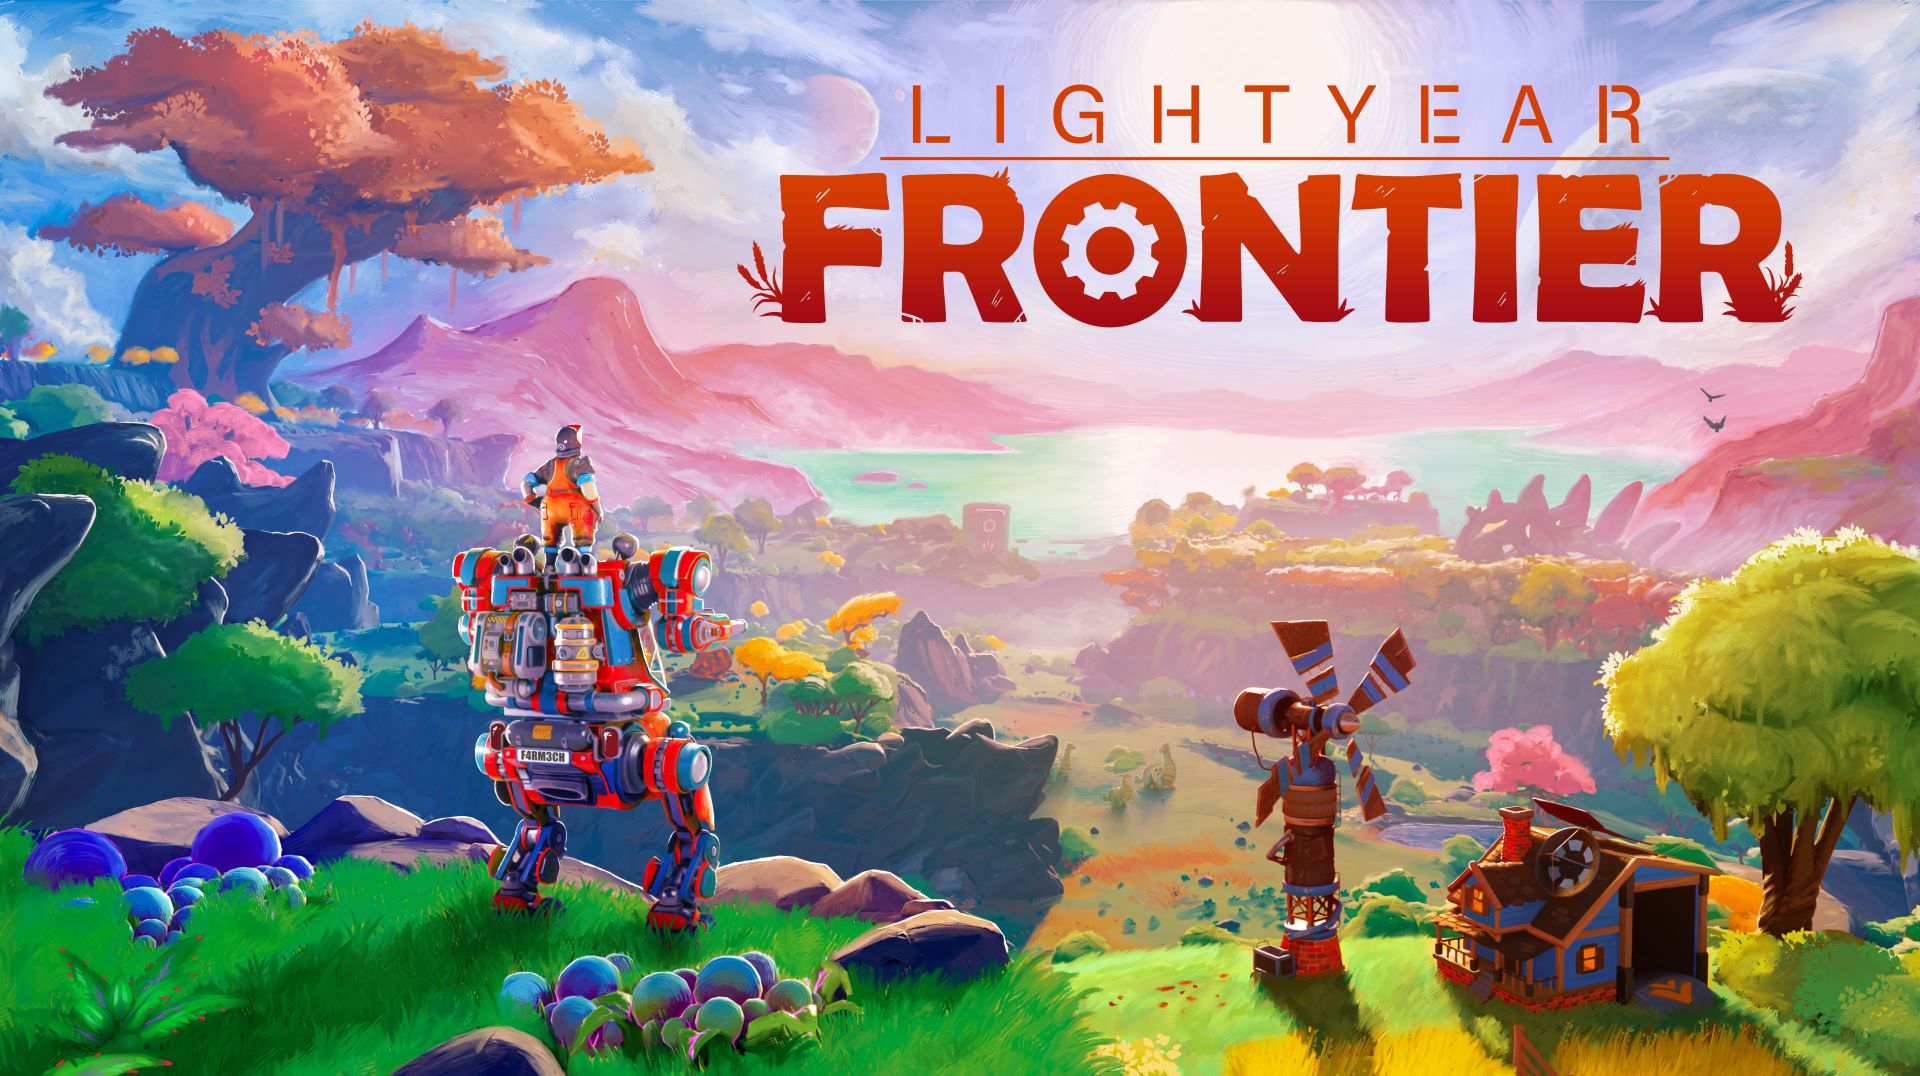 Nurture A Brave New World in Lightyear Frontier, Coming to Xbox Game Pass on March 19